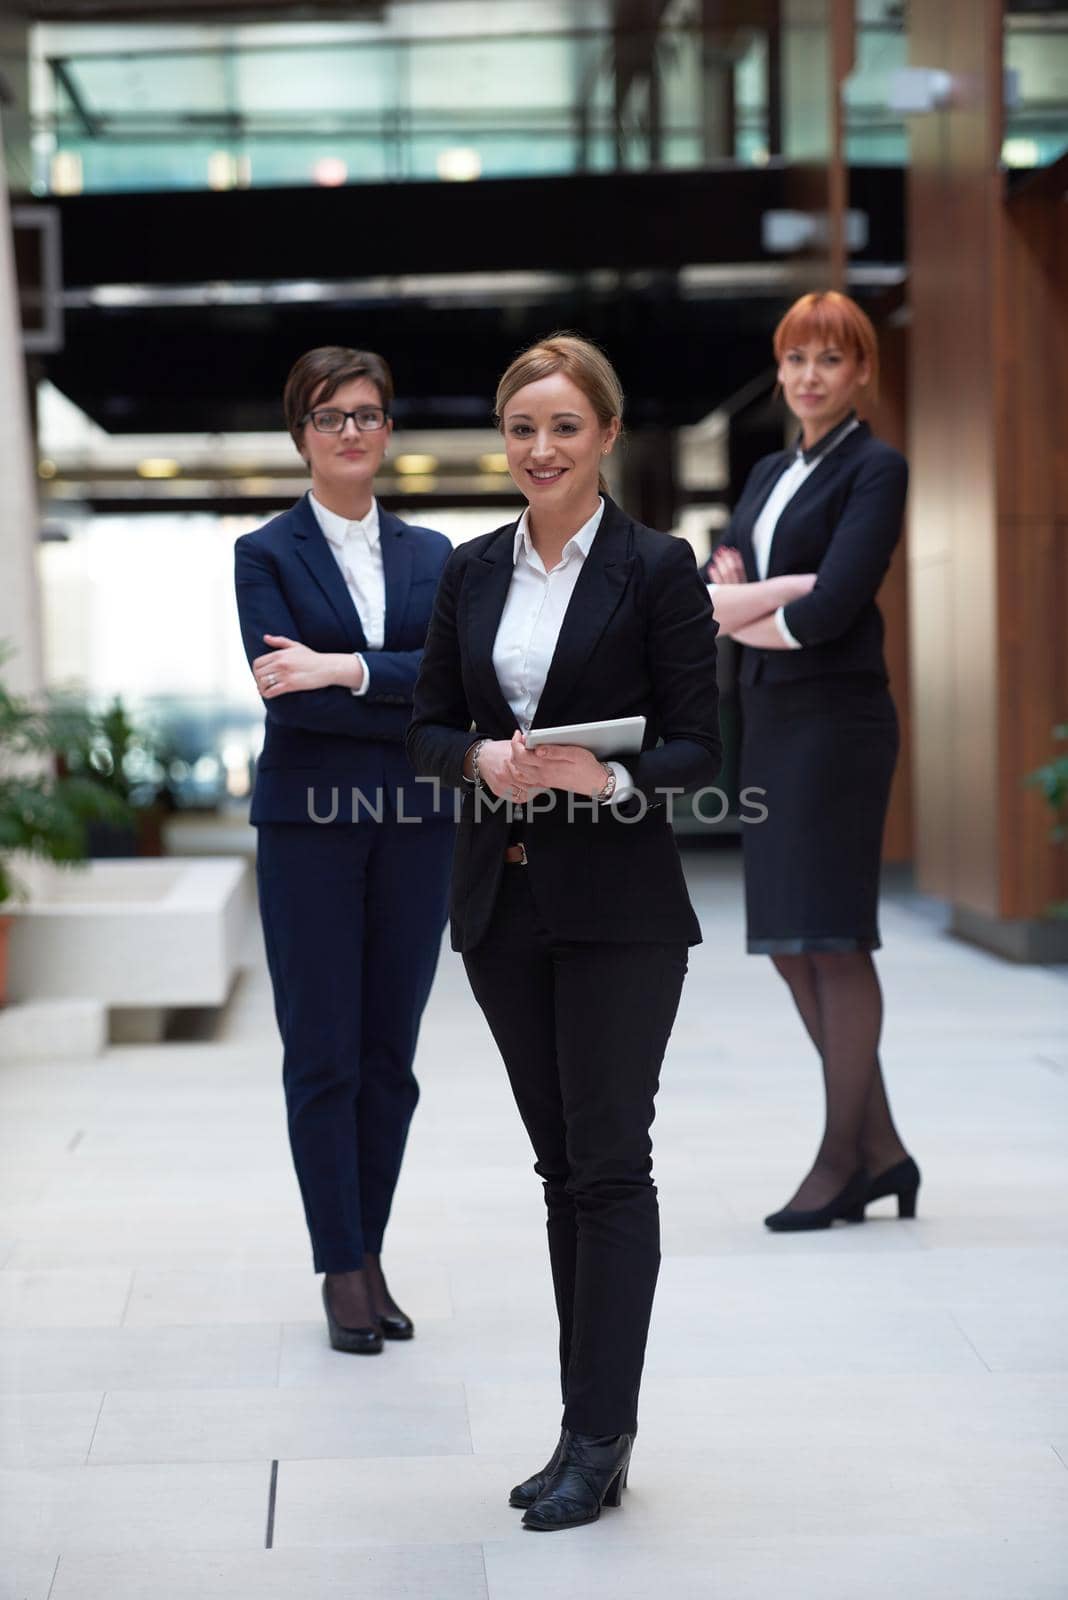 business woman team by dotshock